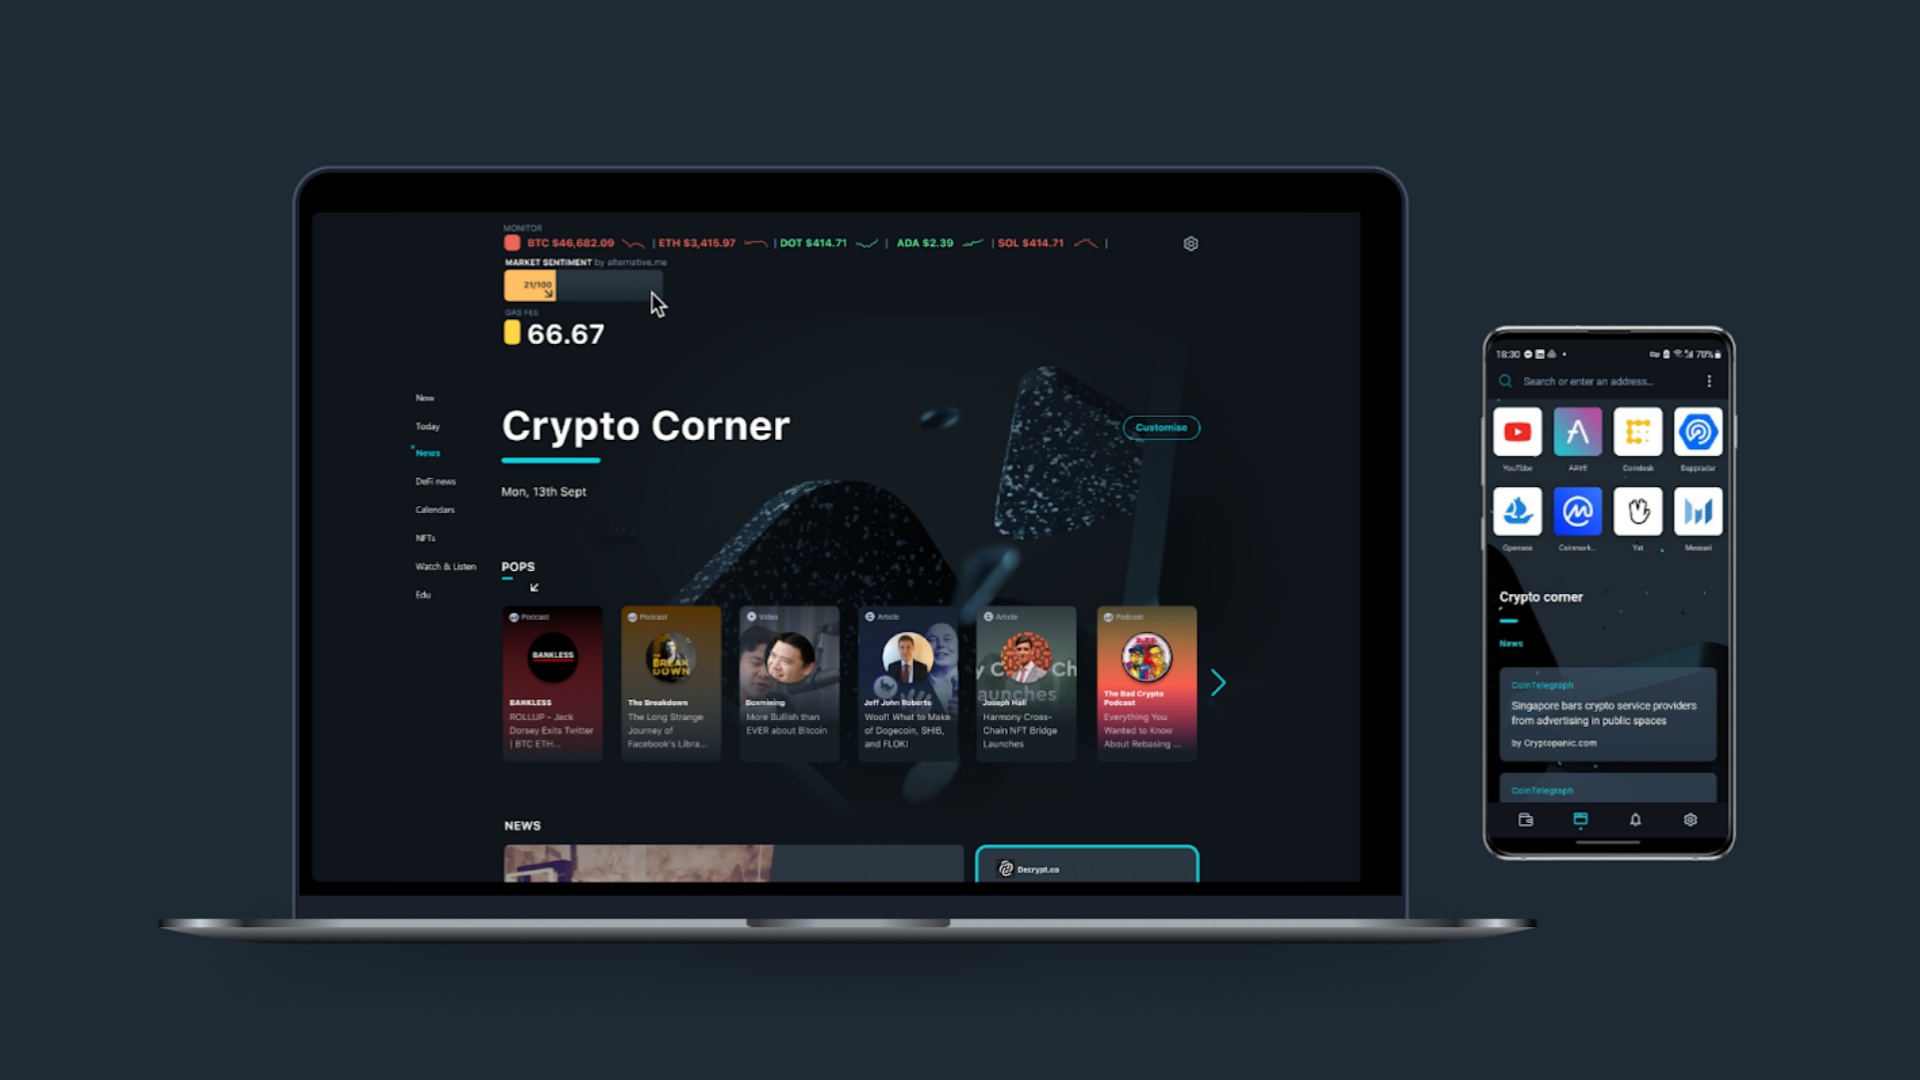 Opera's new Crypto Browser launches in beta for macOS, Windows and Android - Hypertext - htxt.africa